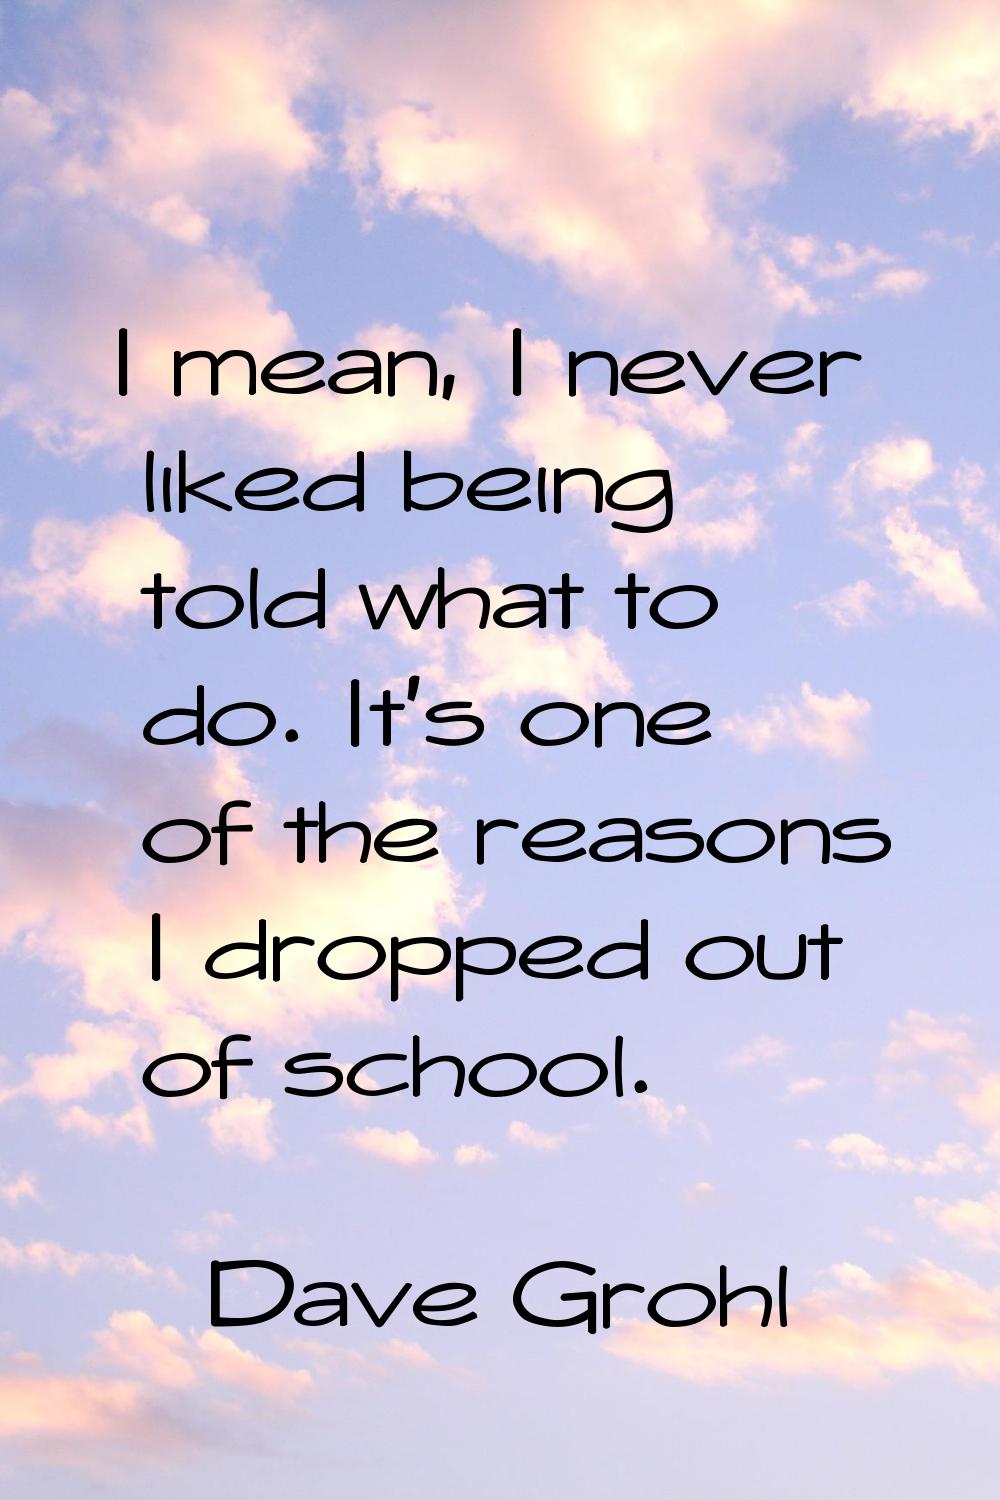 I mean, I never liked being told what to do. It's one of the reasons I dropped out of school.